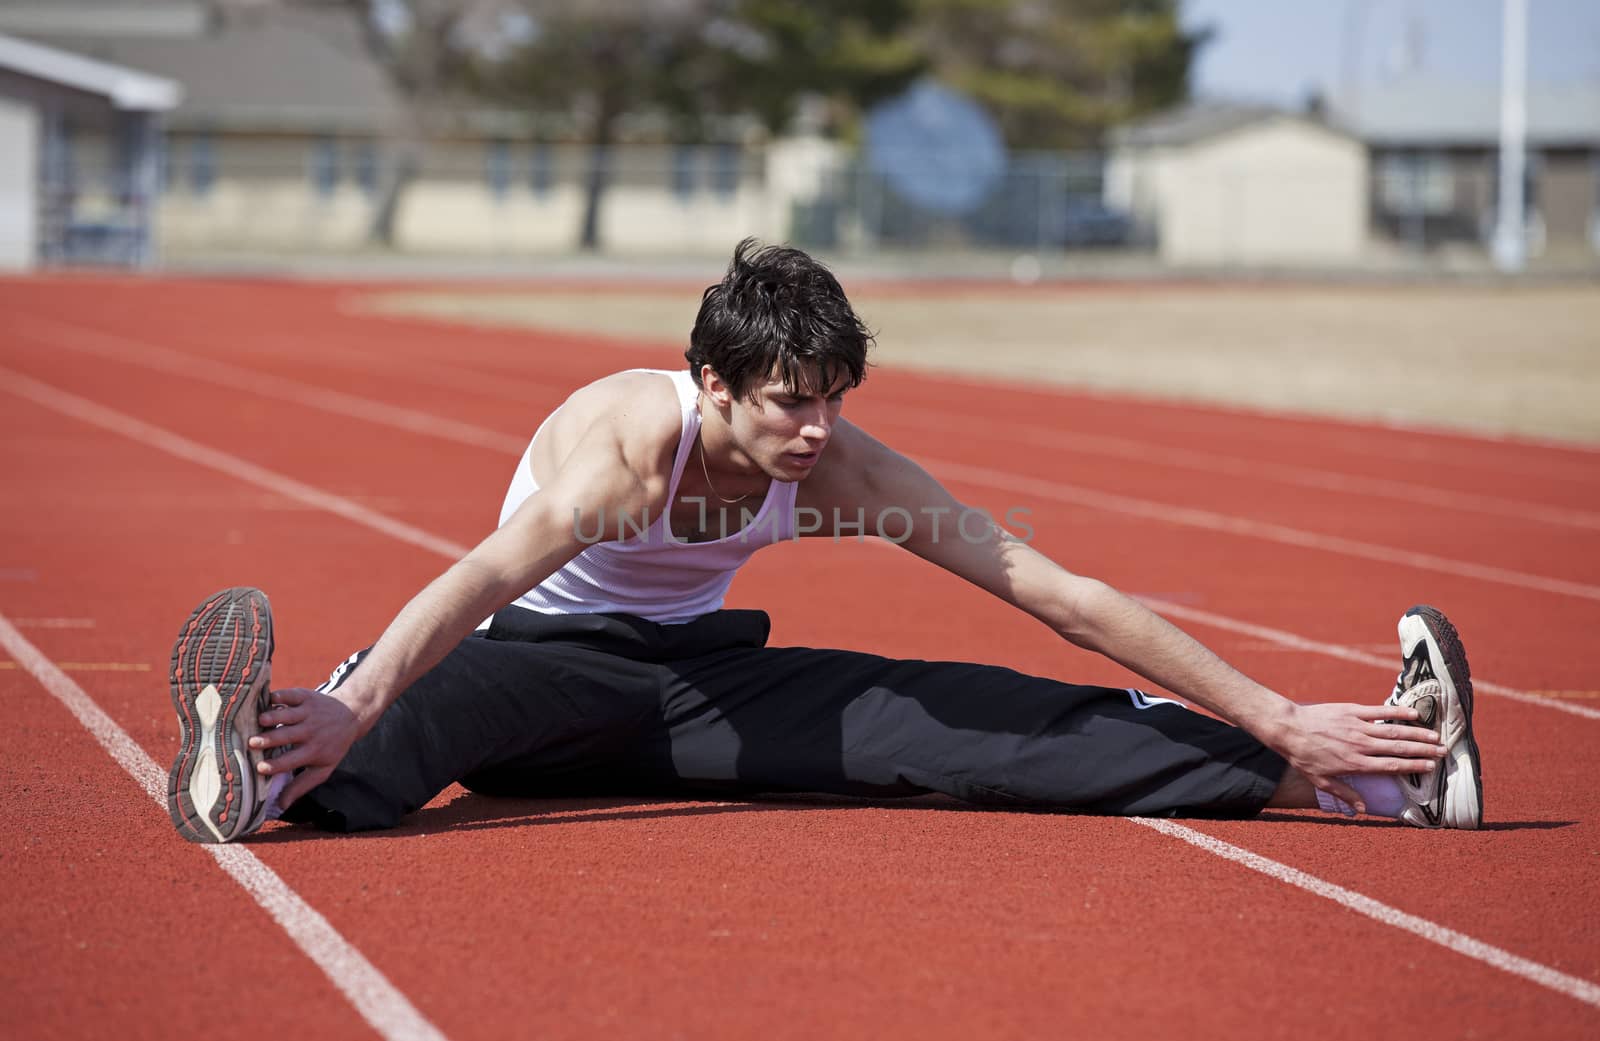 A young athlete doing a warmup leg stretch before a race.